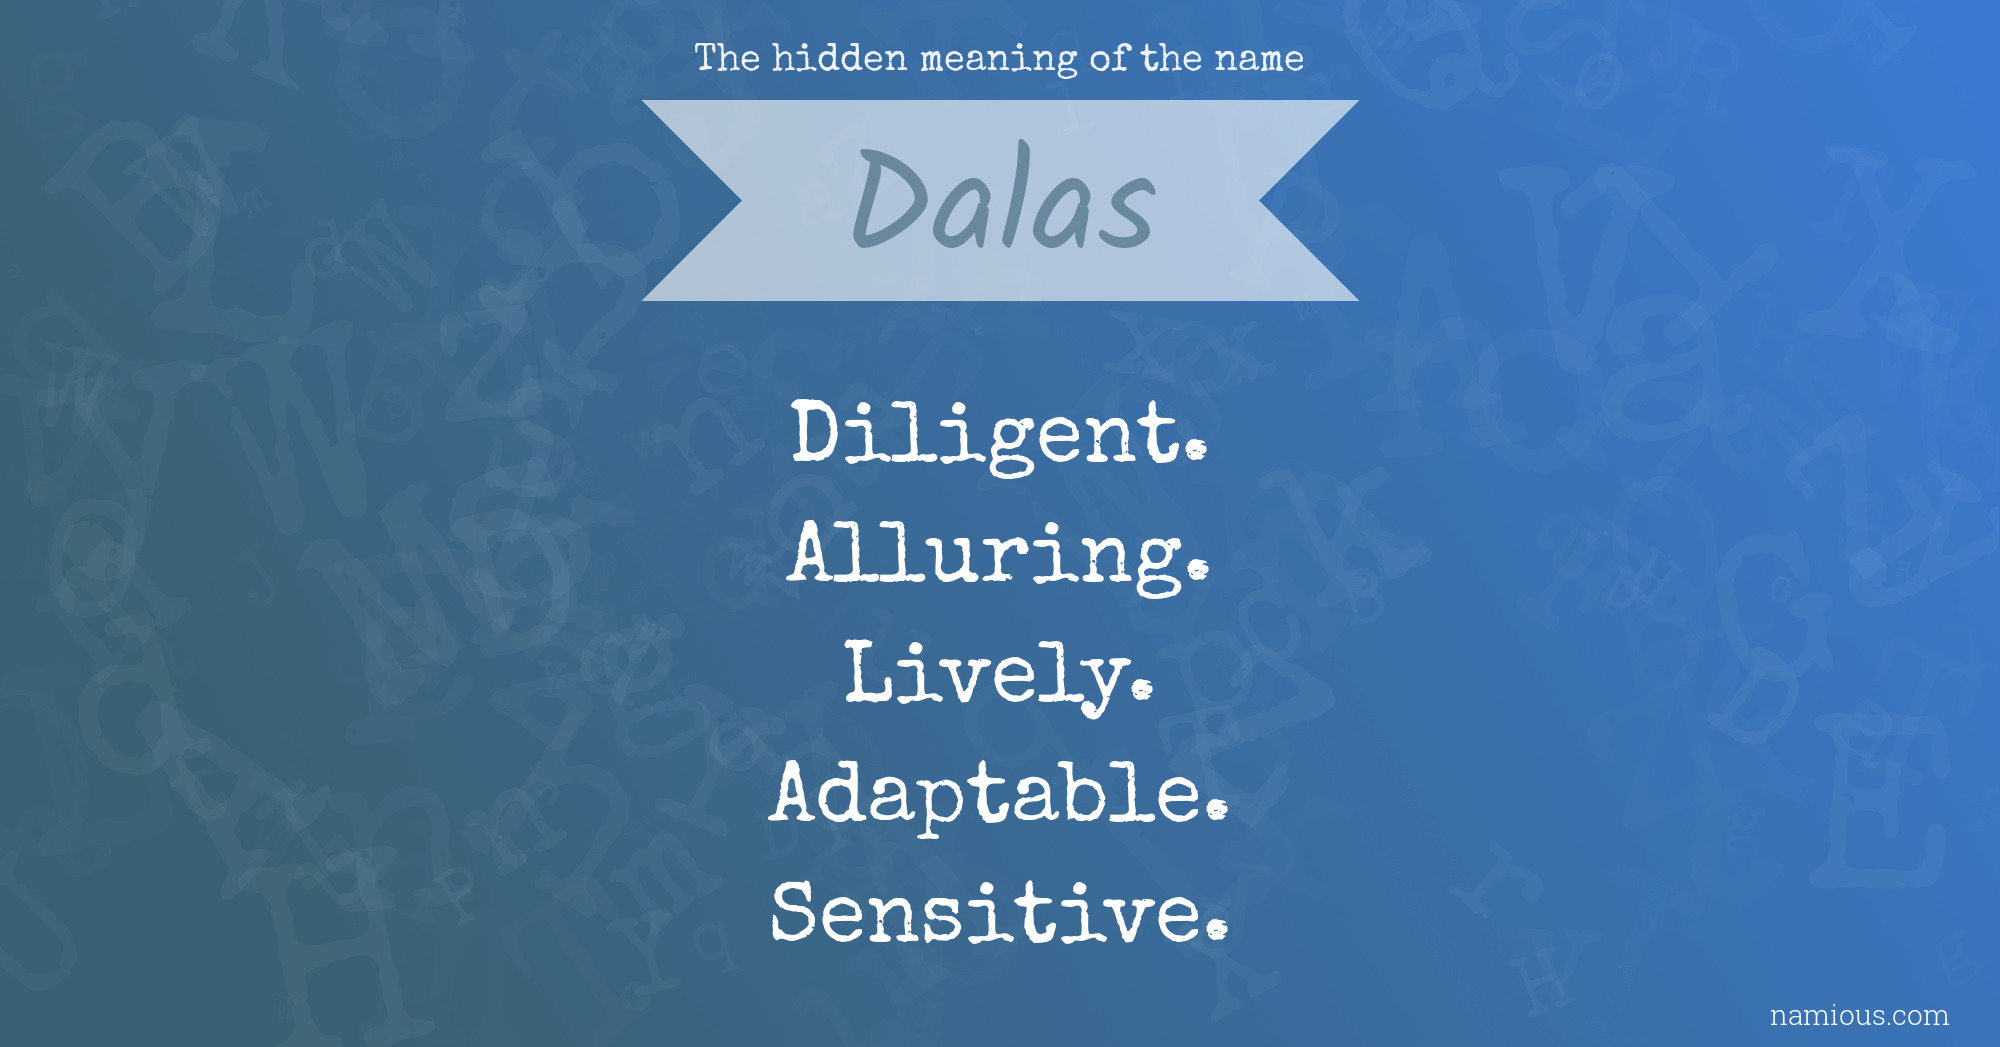 The hidden meaning of the name Dalas